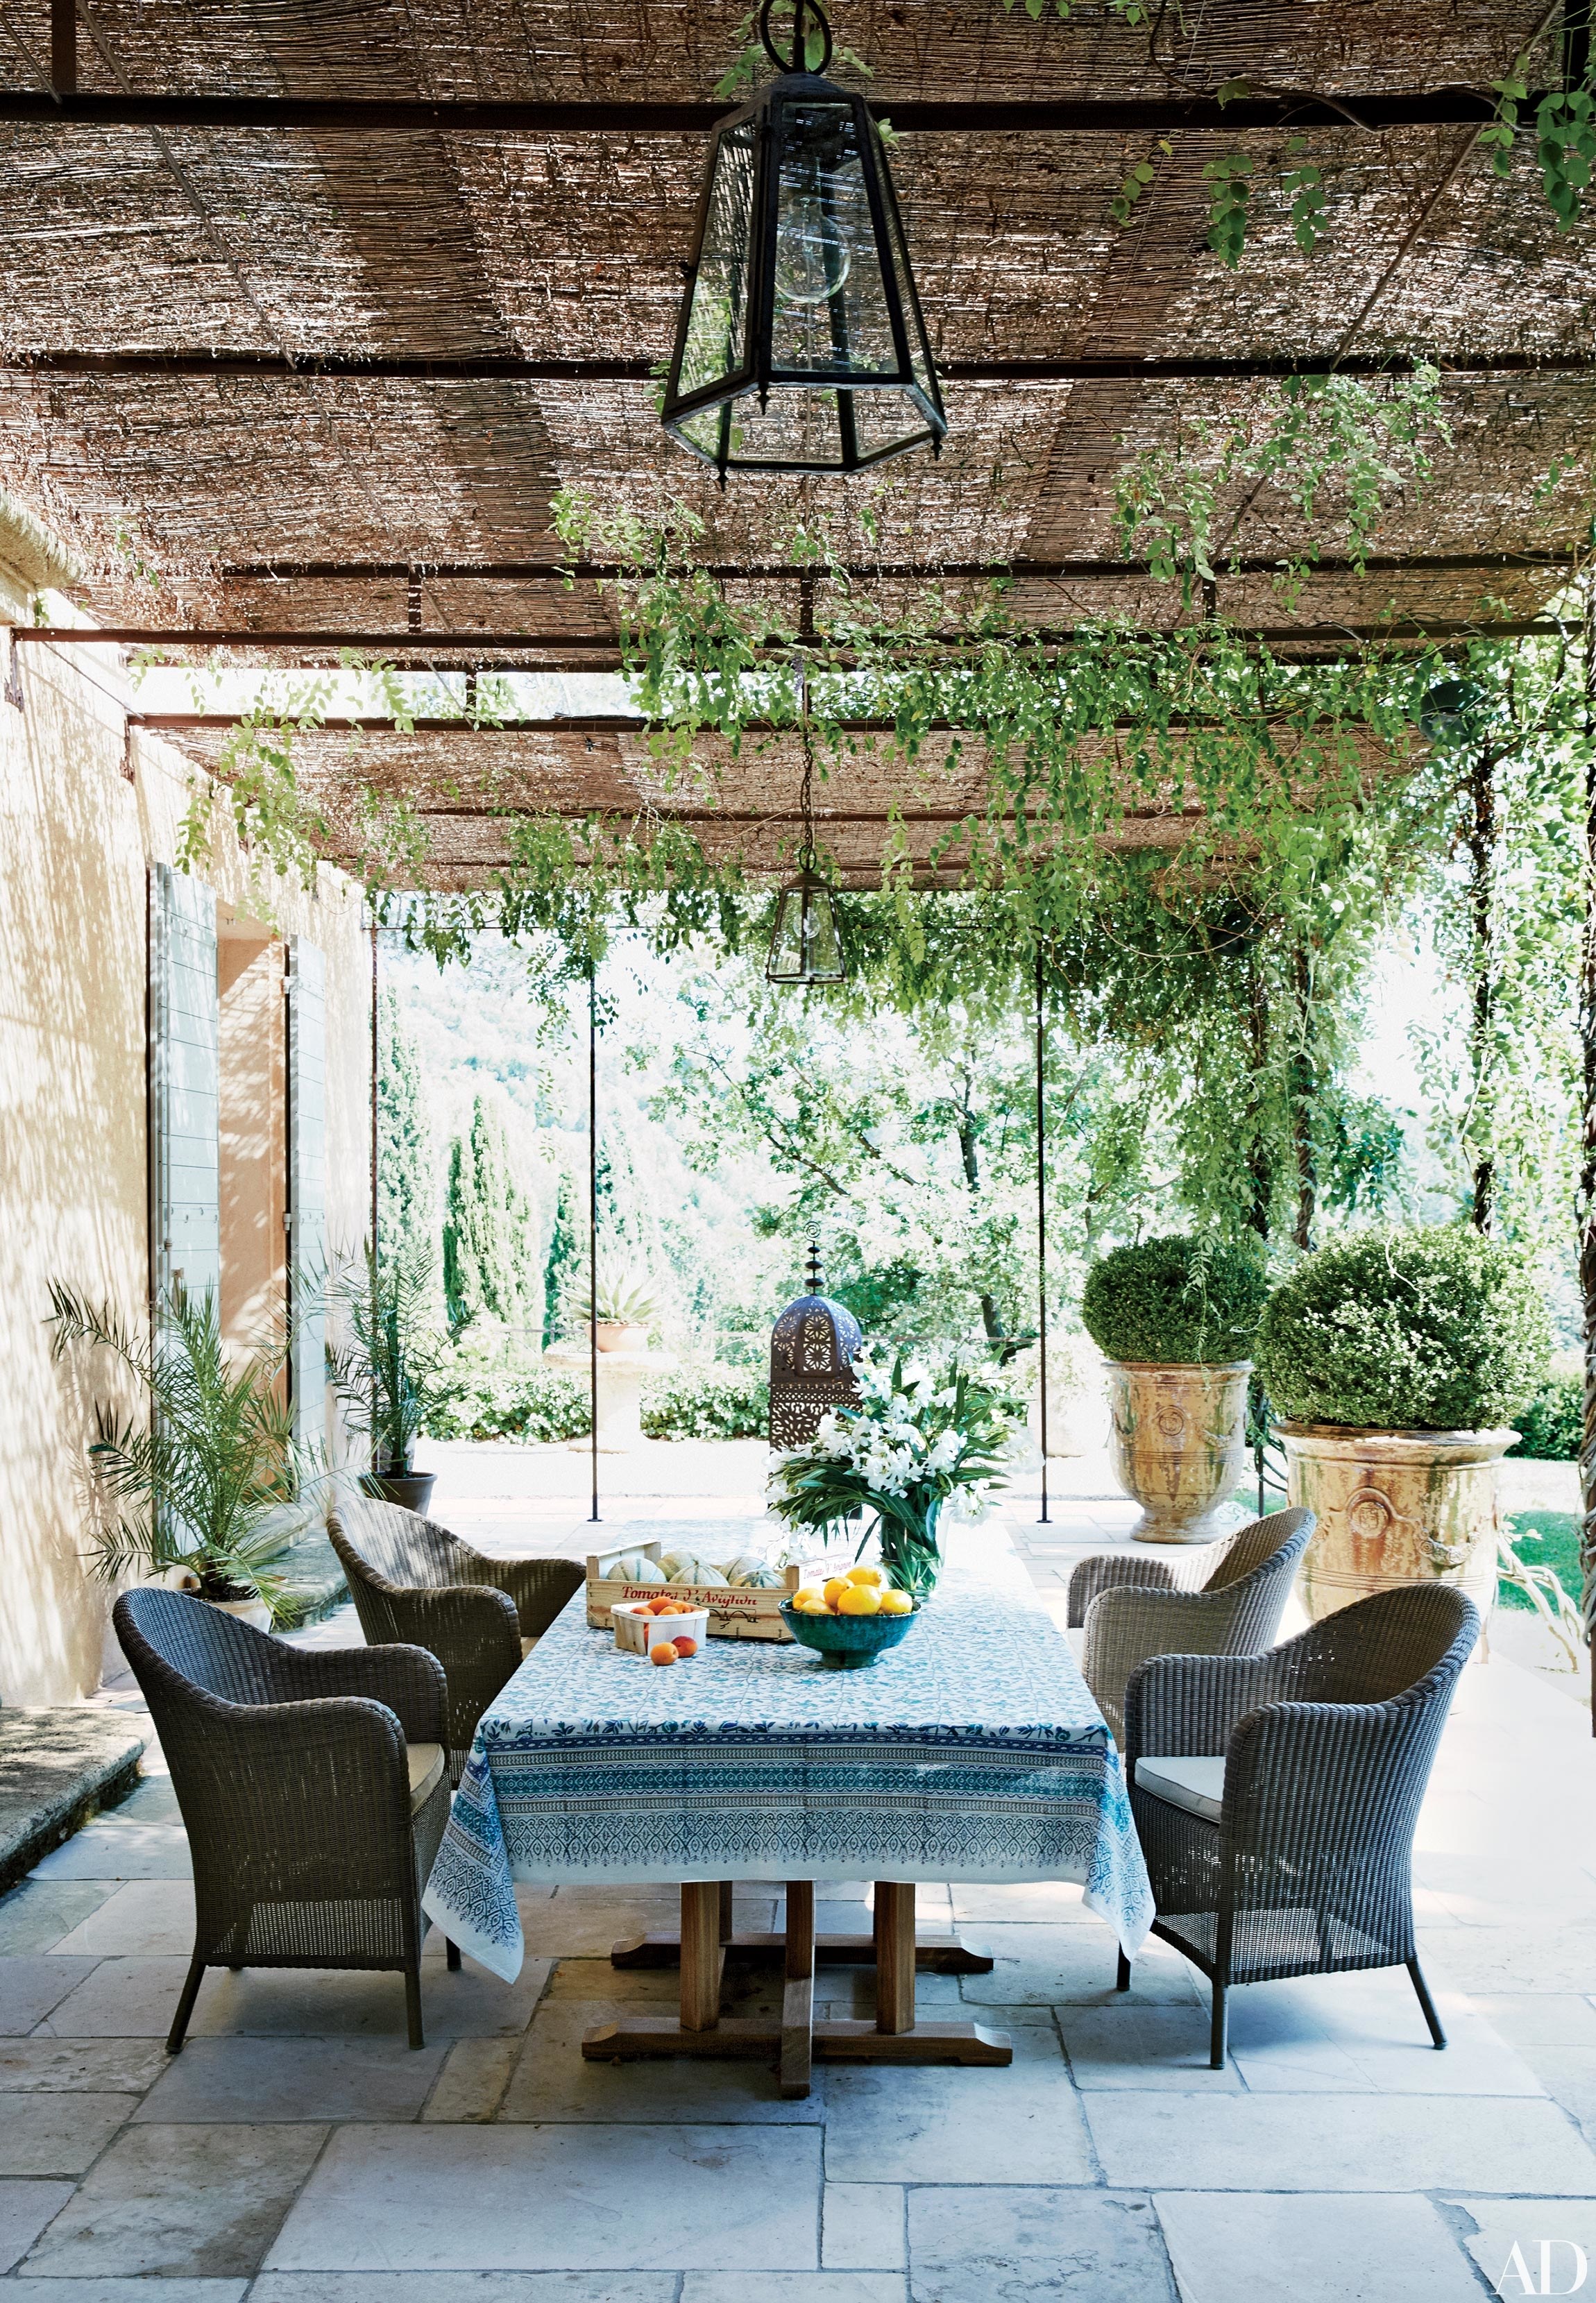 alfresco dining in gorgeous must see outdoor dining areas | lovelyspaces.com